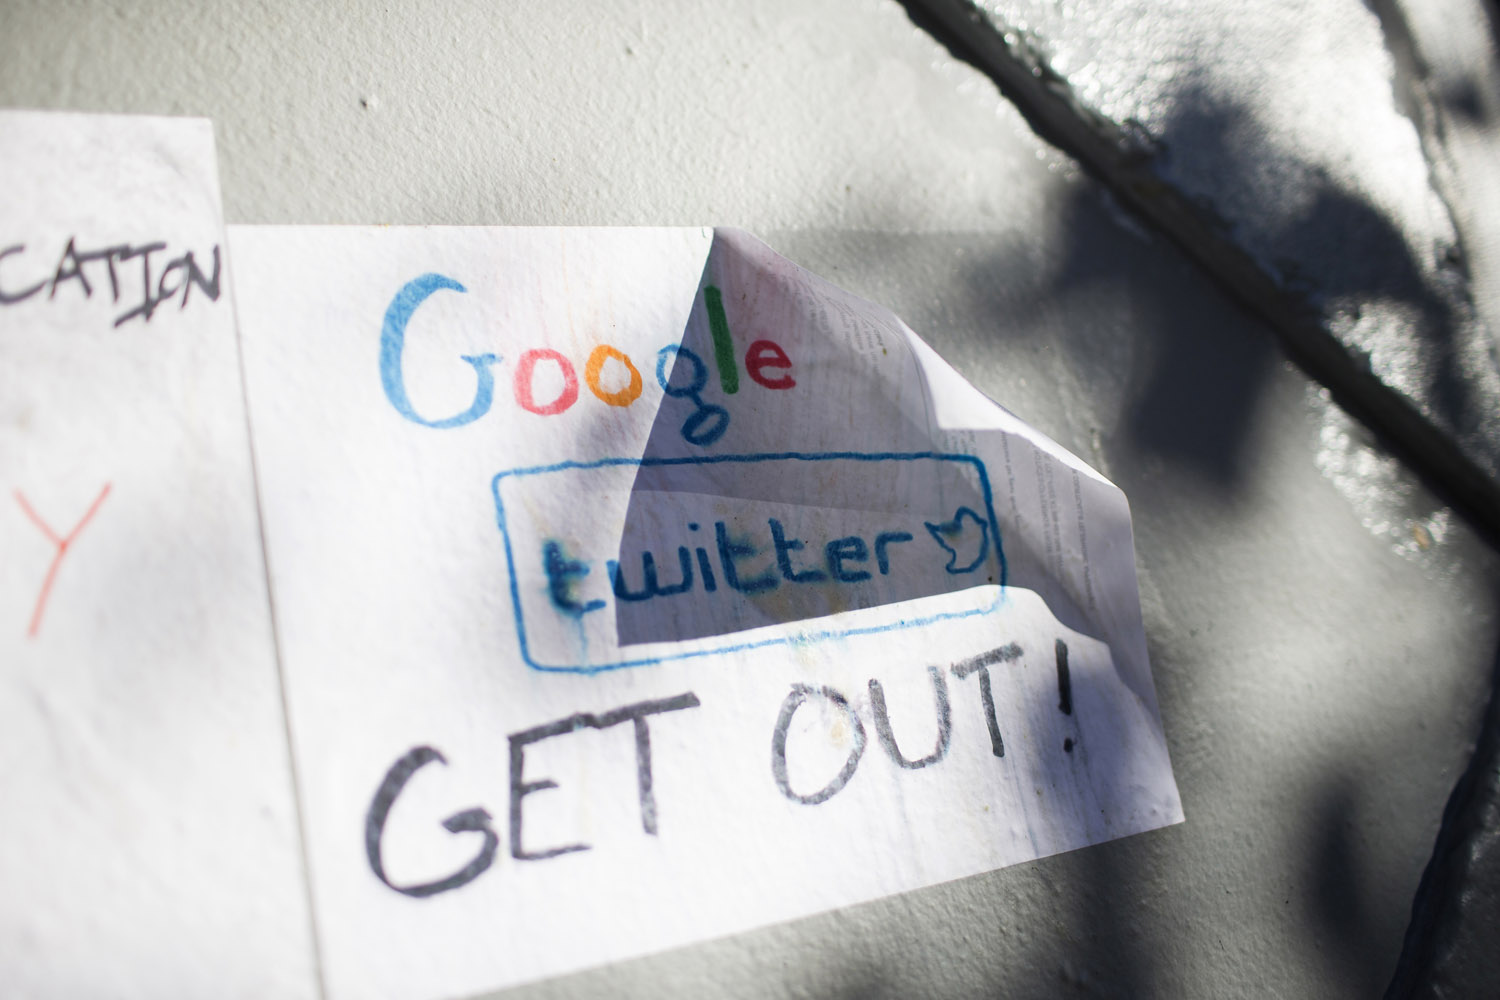 Signs in opposition of technology companies are seen in San Francisco, California Dec. 9, 2013. (Stephen Lam&mdash;Reuters)